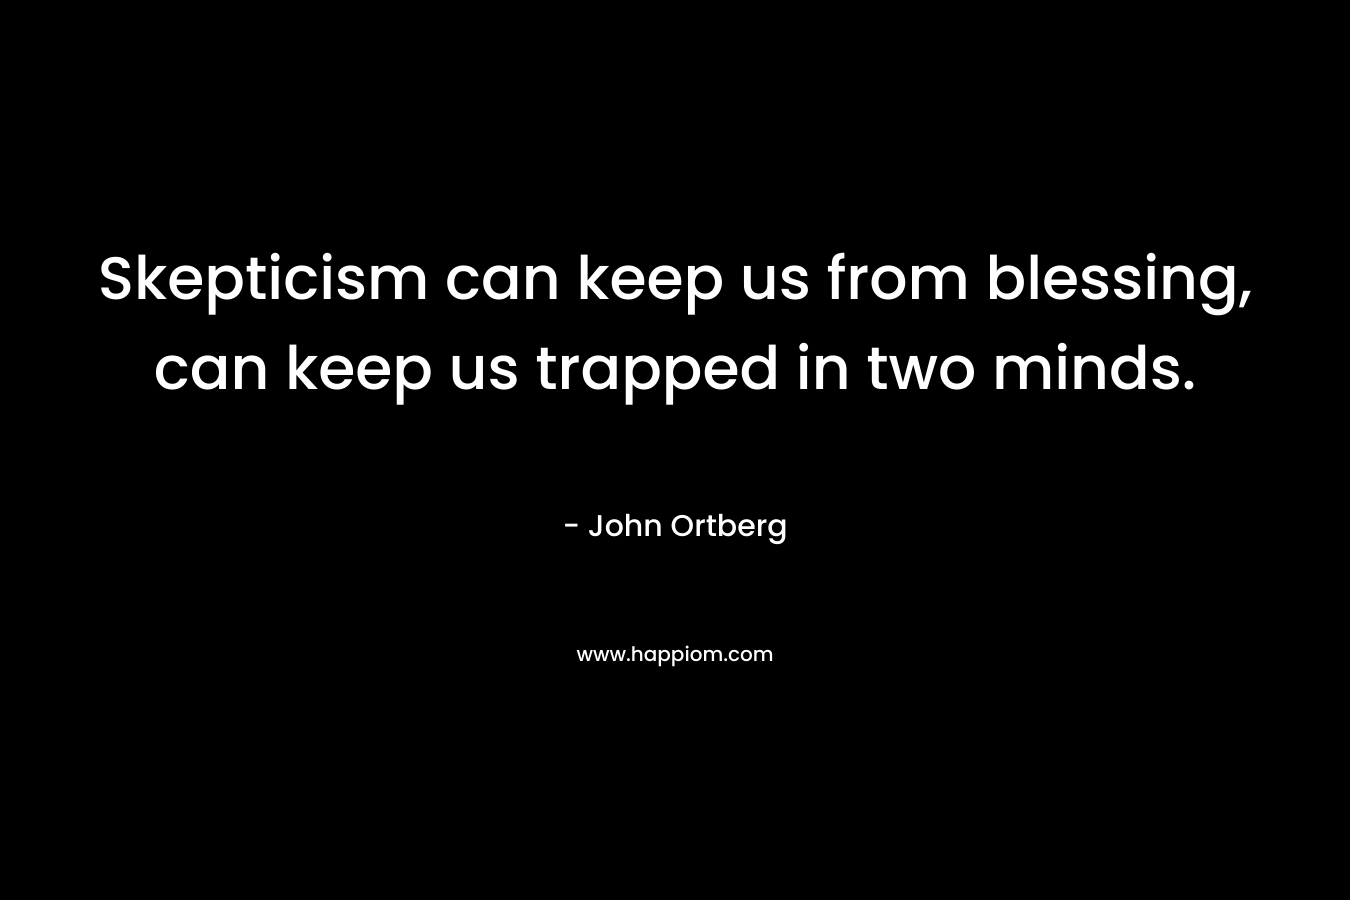 Skepticism can keep us from blessing, can keep us trapped in two minds. – John Ortberg